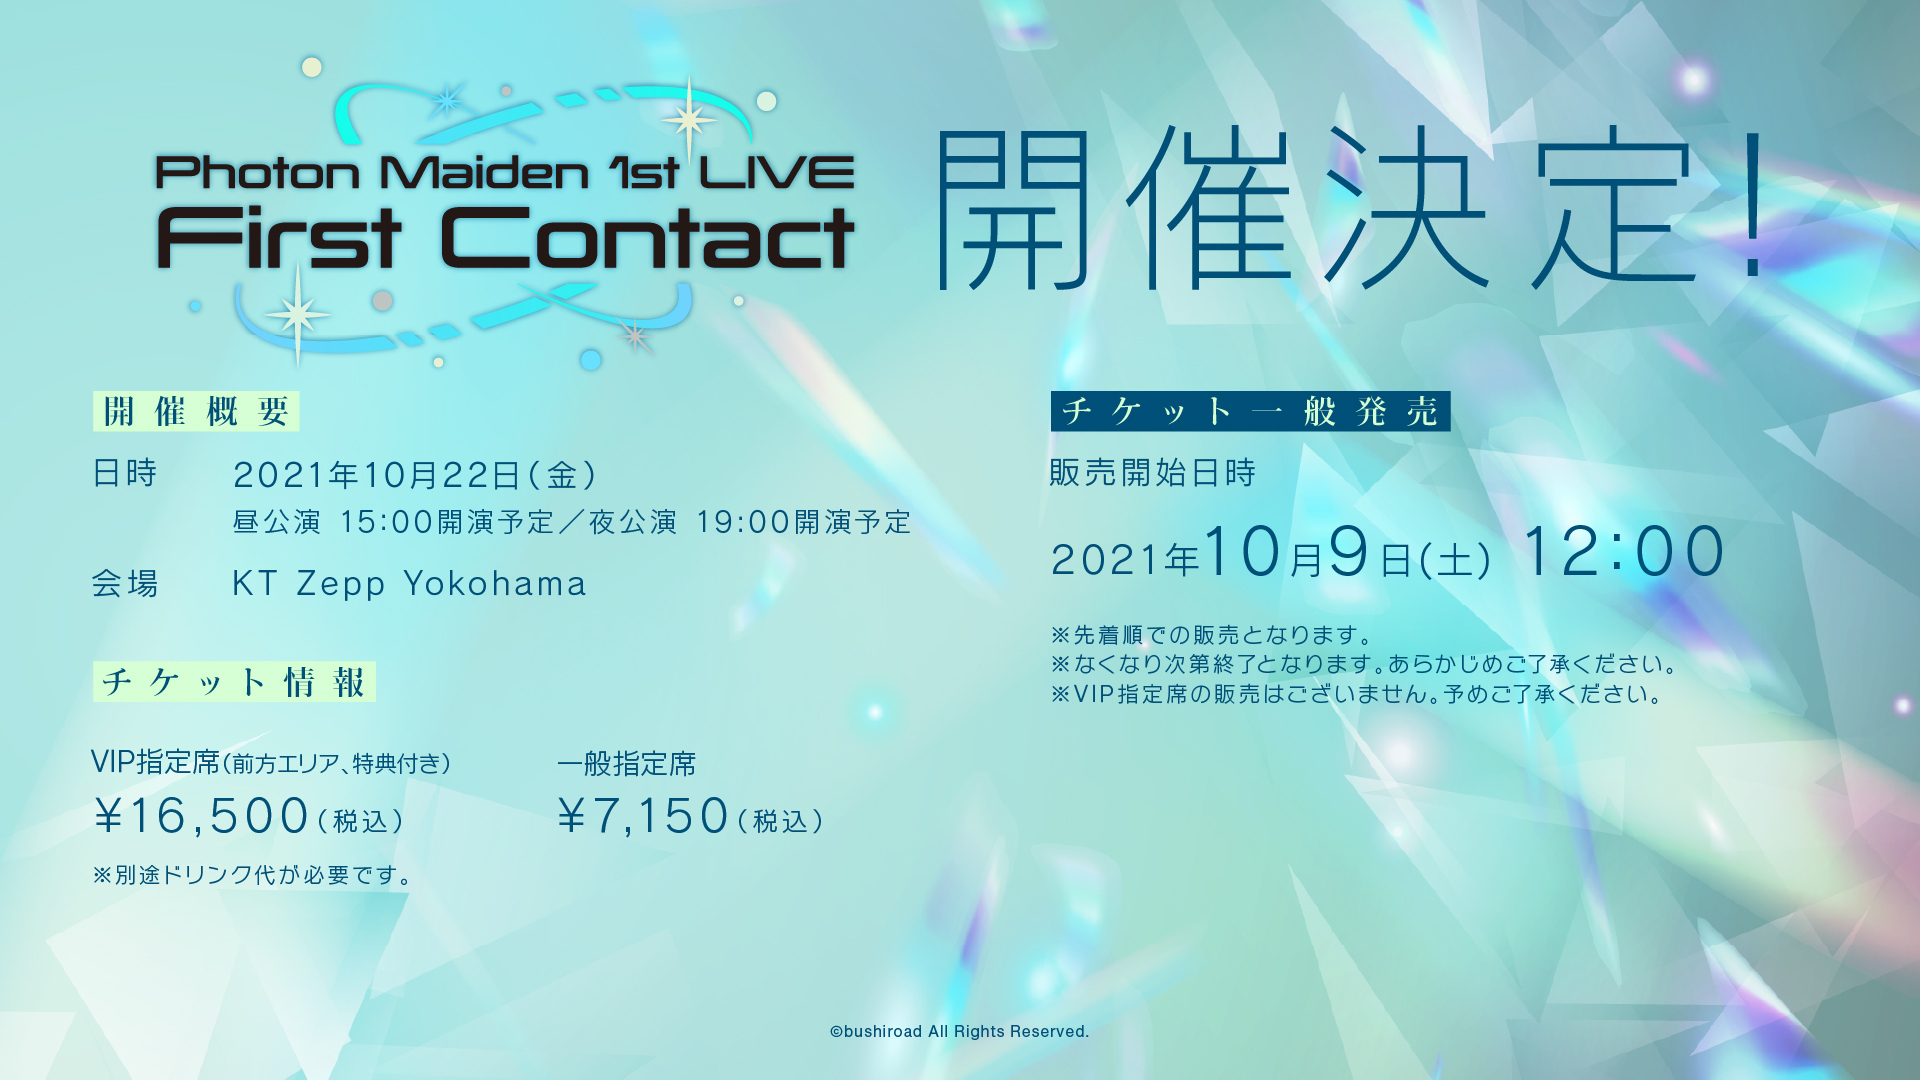 「Photon Maiden 1st LIVE First Contact」明日開催！のサブ画像1